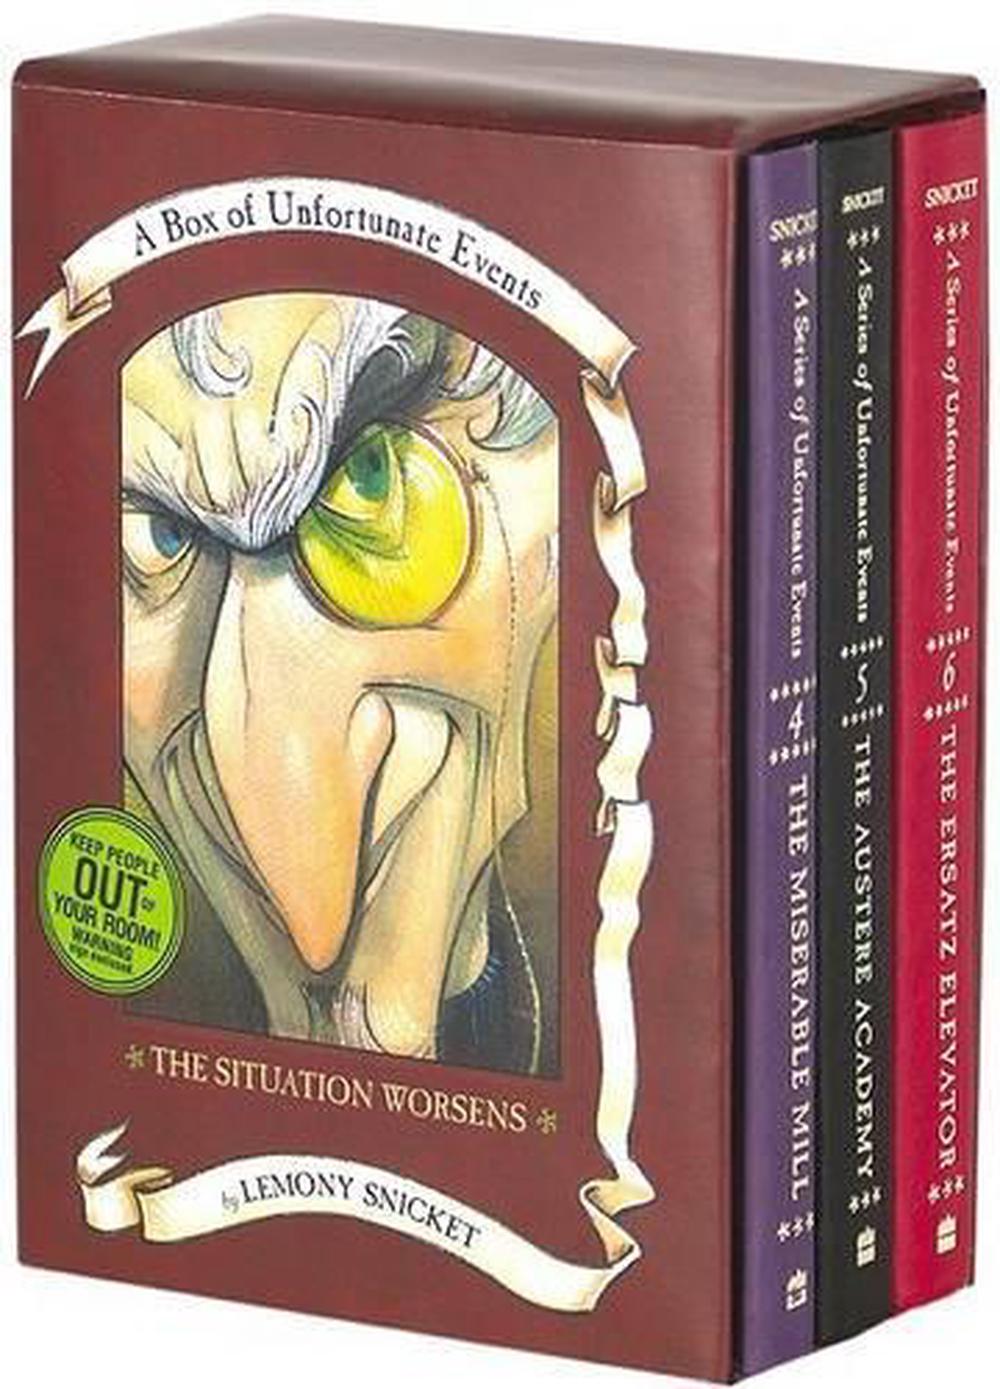 Box of Unfortunate Events The Situation Worsens Books 46 by Lemony